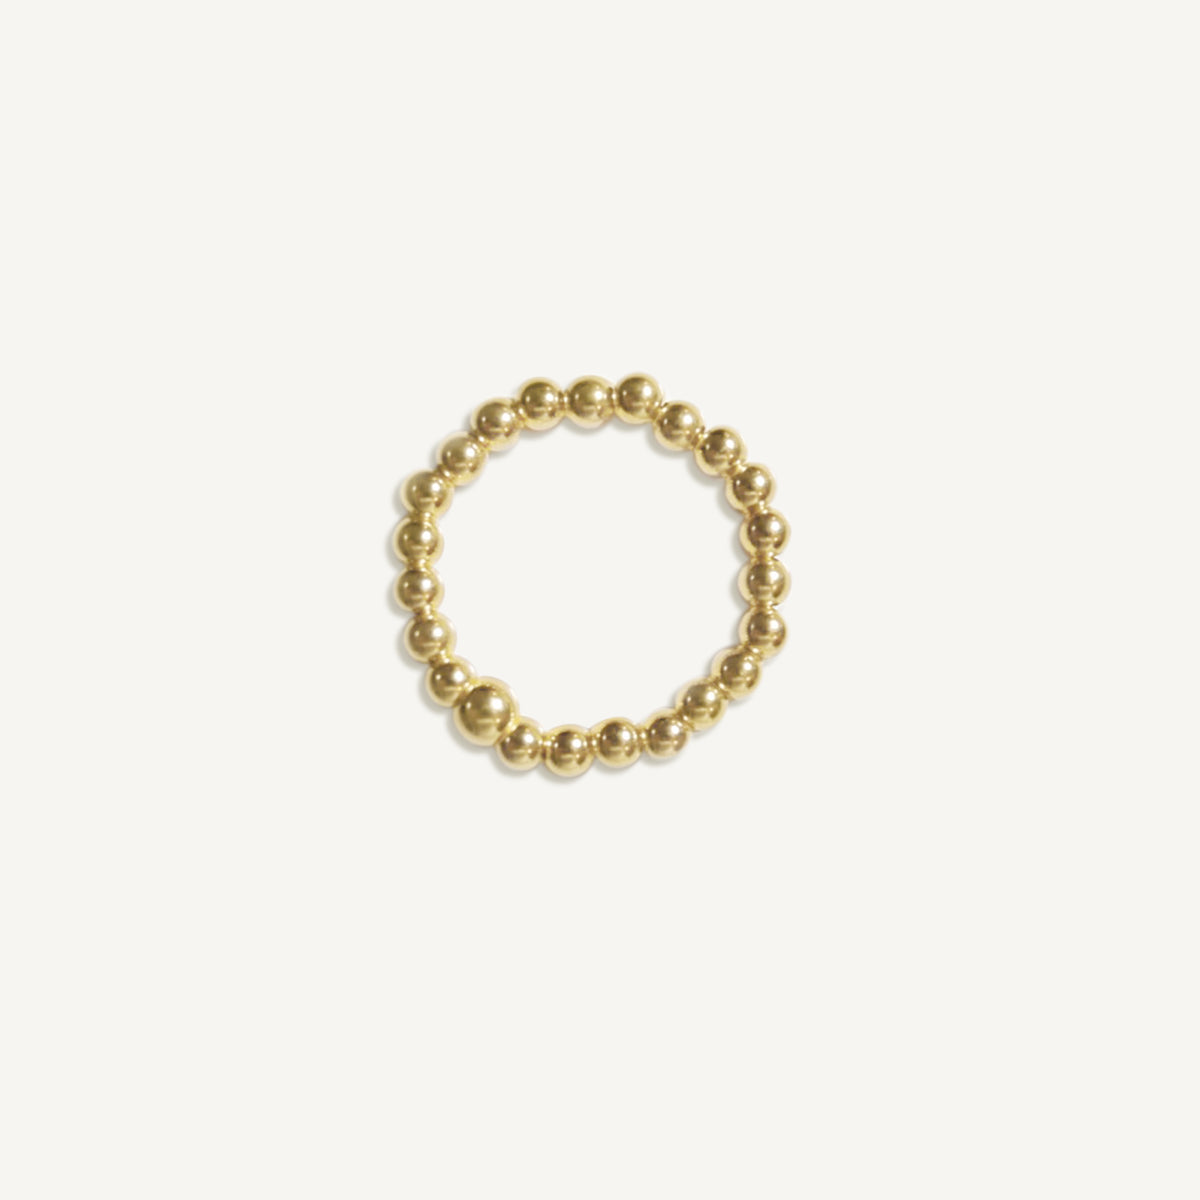 The Golden Ball Soft Chain Ring